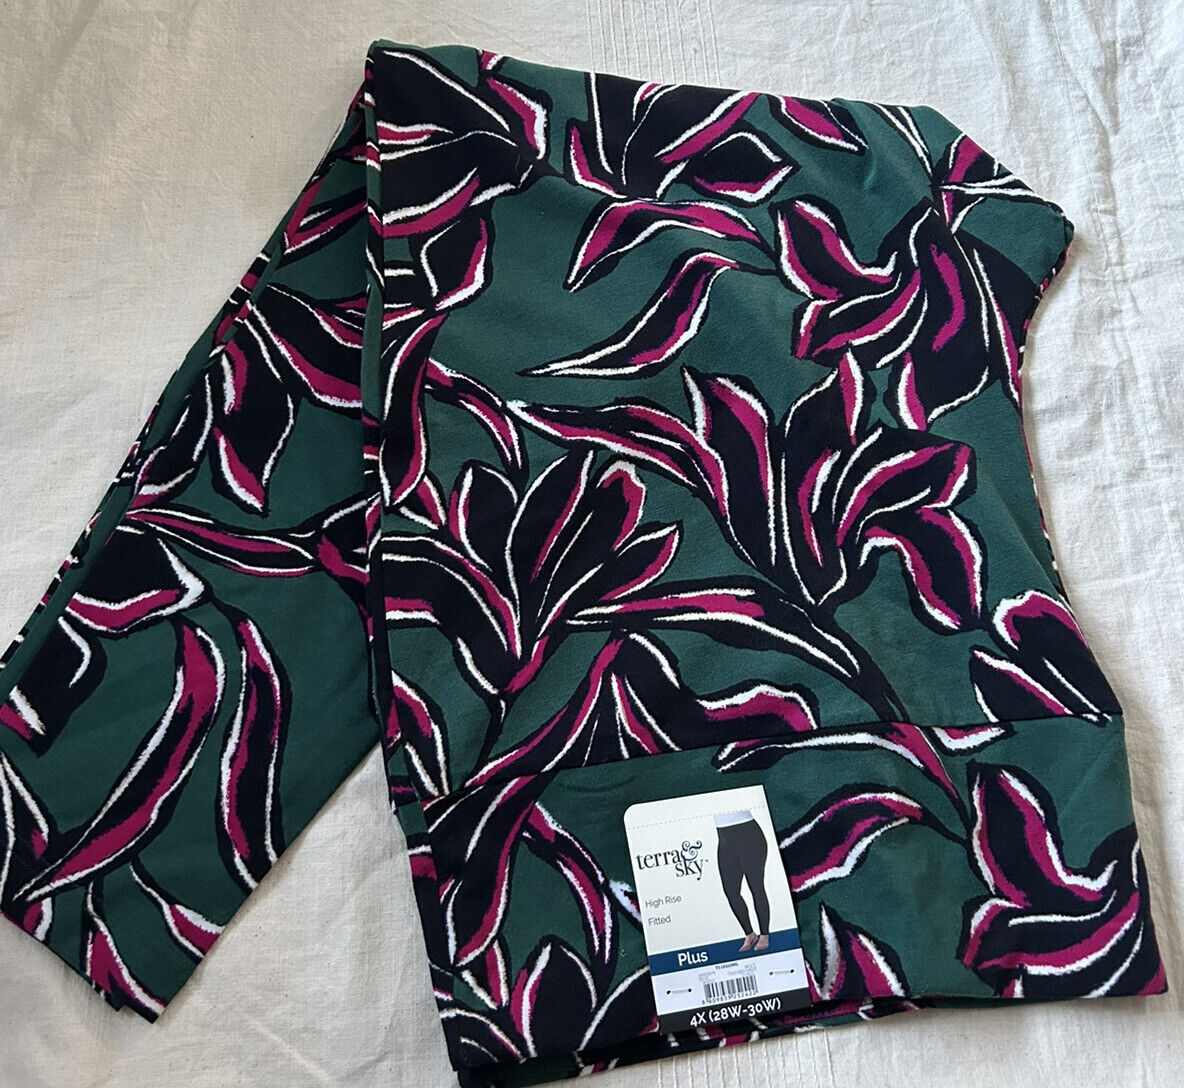 Terra & Sky Womens Green, Black & pINK fLORAL Plus Size 4x High